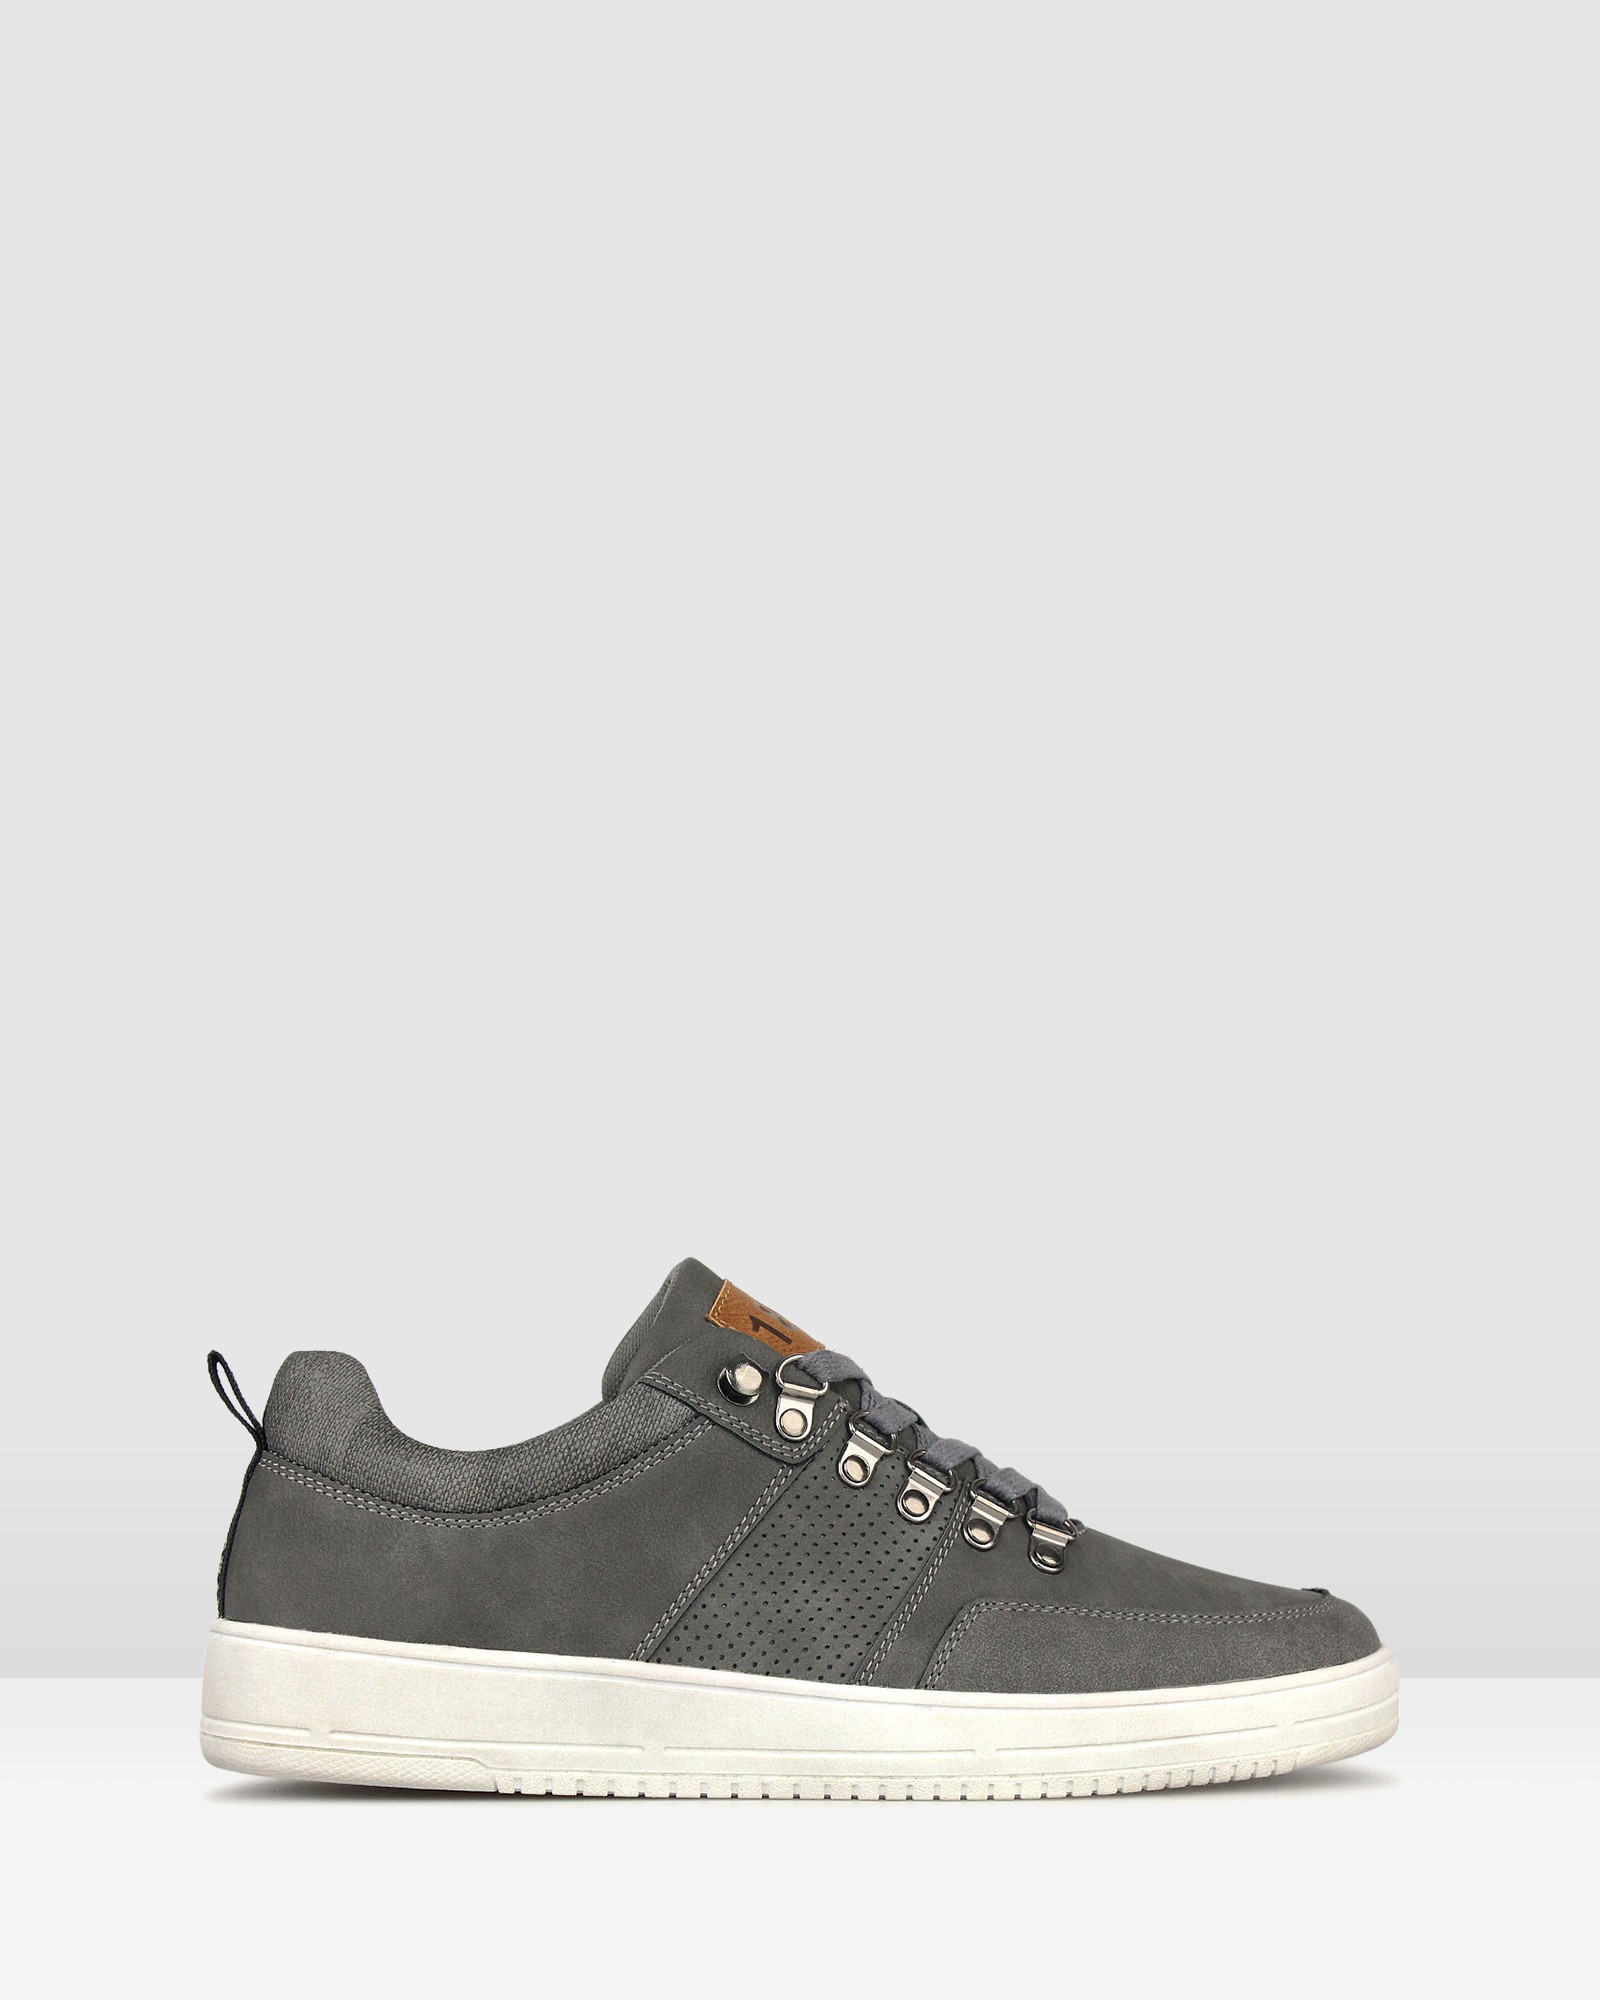 Zoom Low Top Lifestyle Sneakers Grey by Betts | ShoeSales